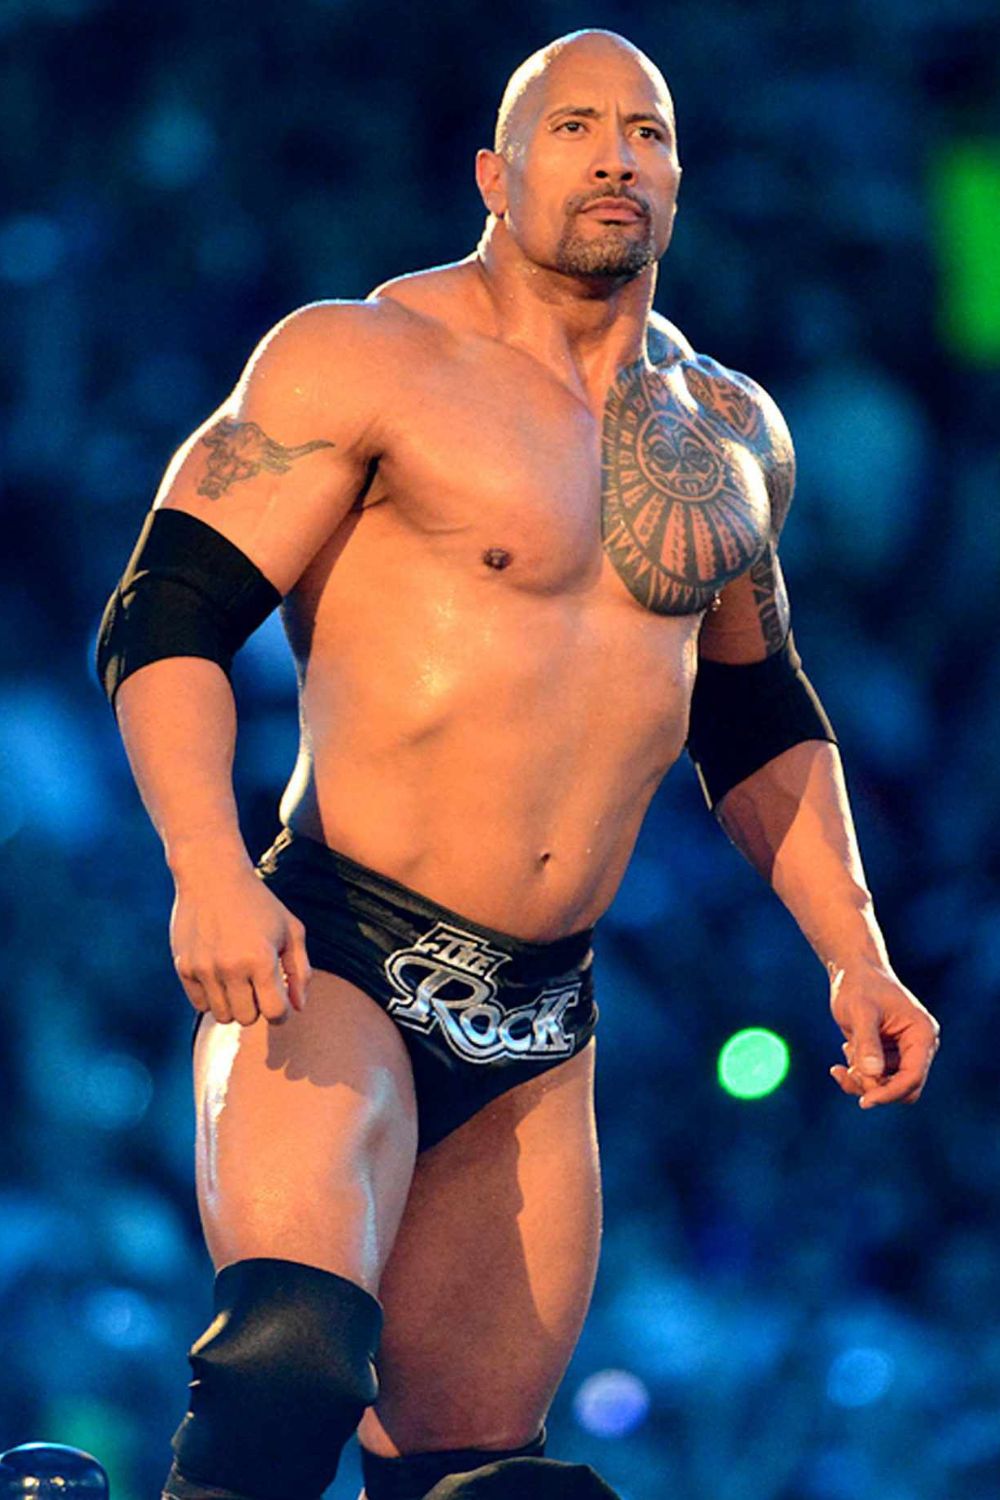 The Rock During The Match